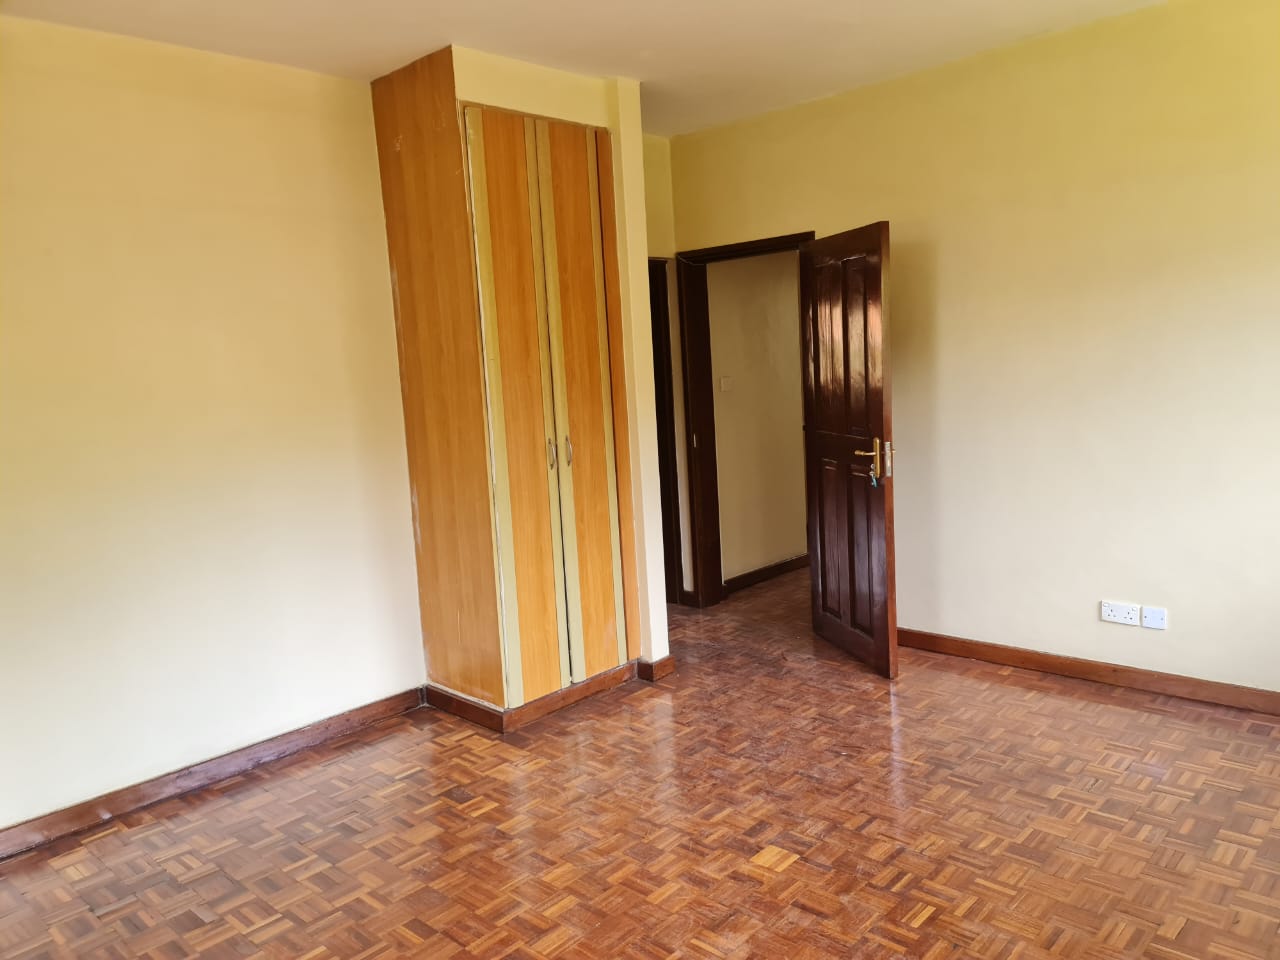 5 Bedrooms House in a gated community of 12 units in Lower kabete for rent at Ksh400k negotiable (13)